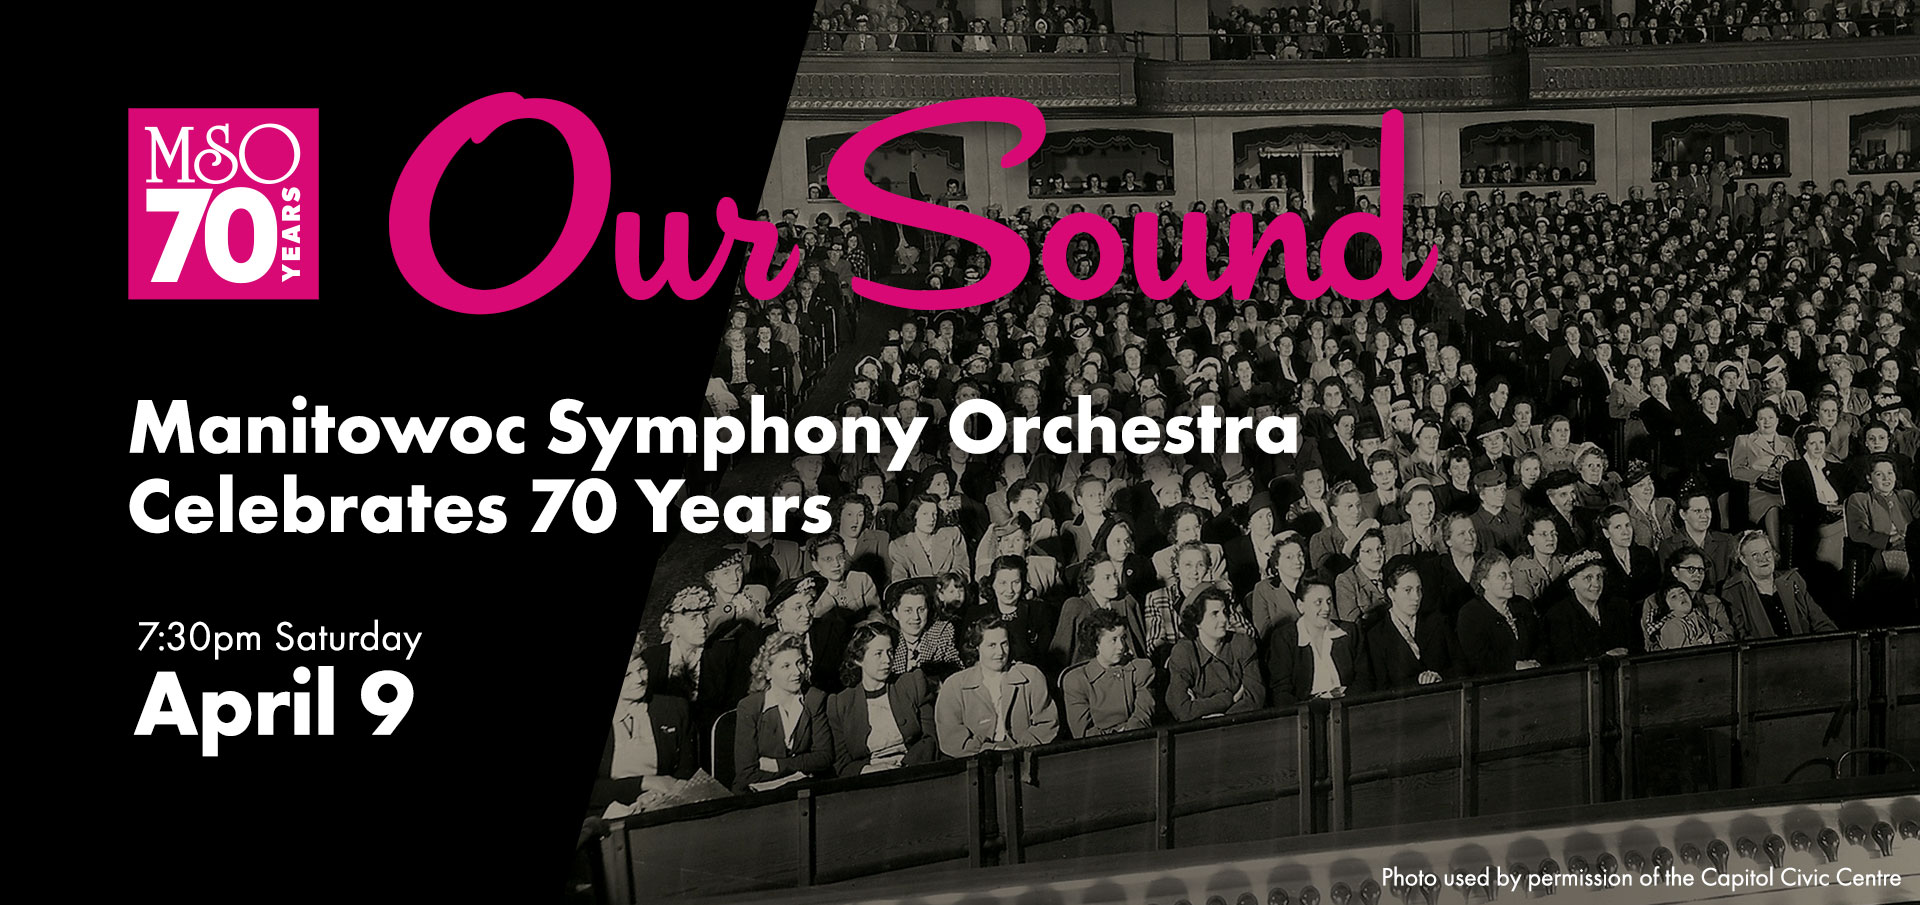 Our Sound: Celebrating 70 Years! April 9, 2022